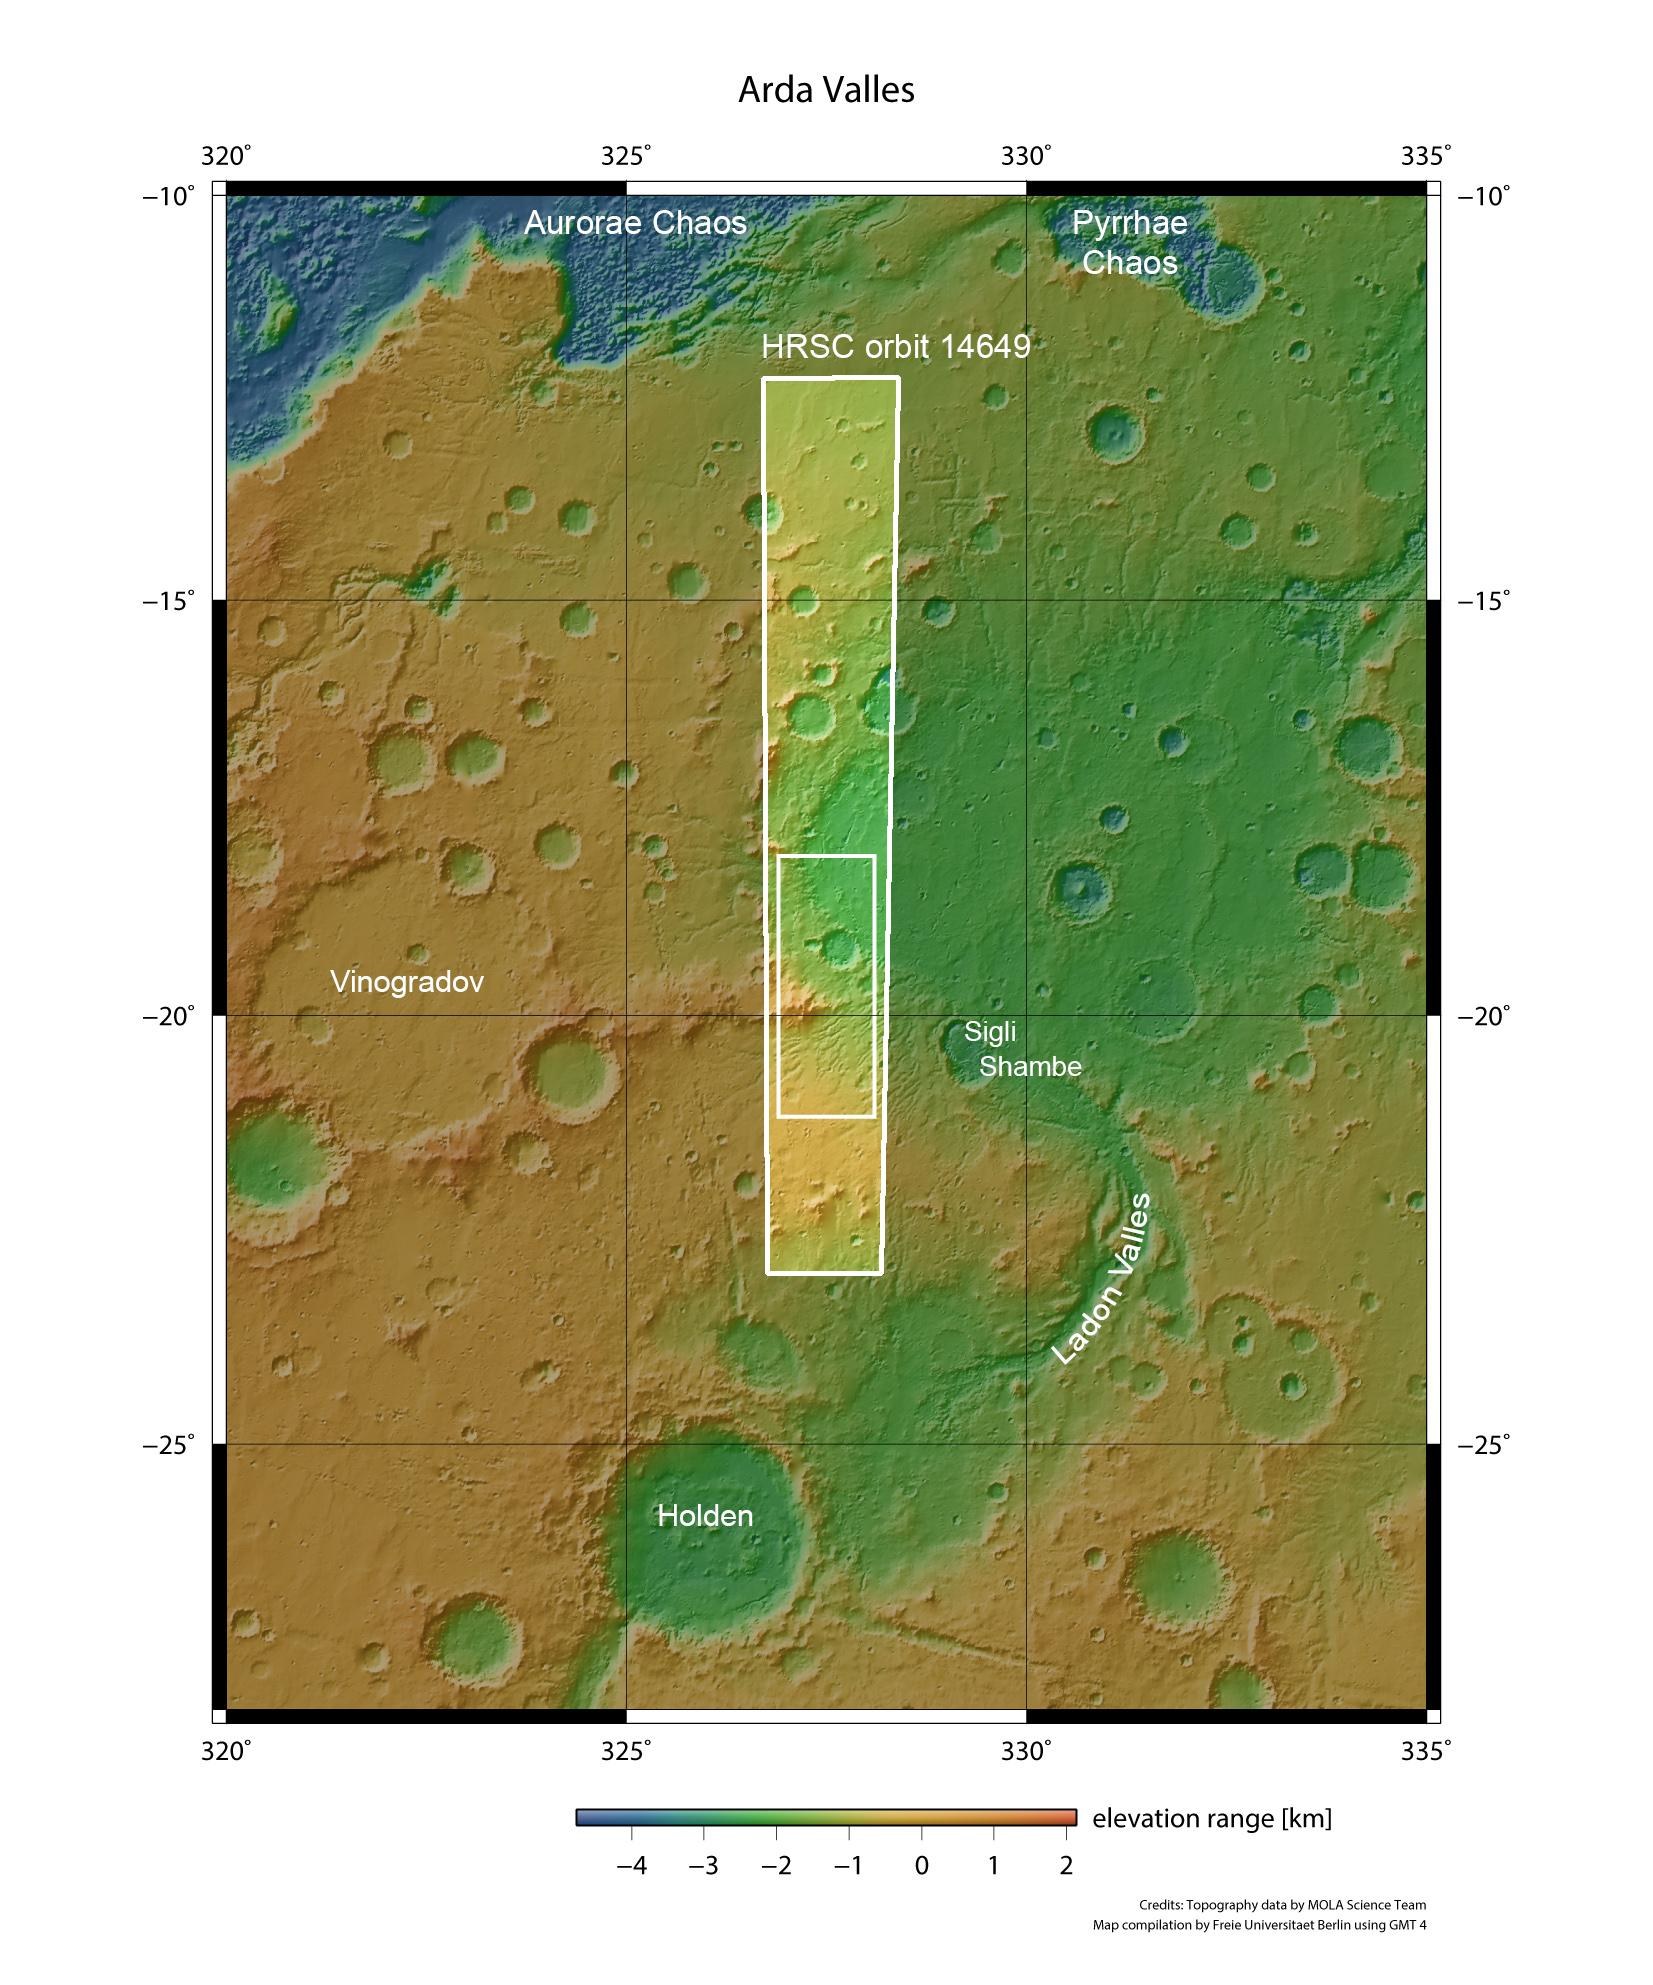 Topographical context map of Arda Valles and surrounding area